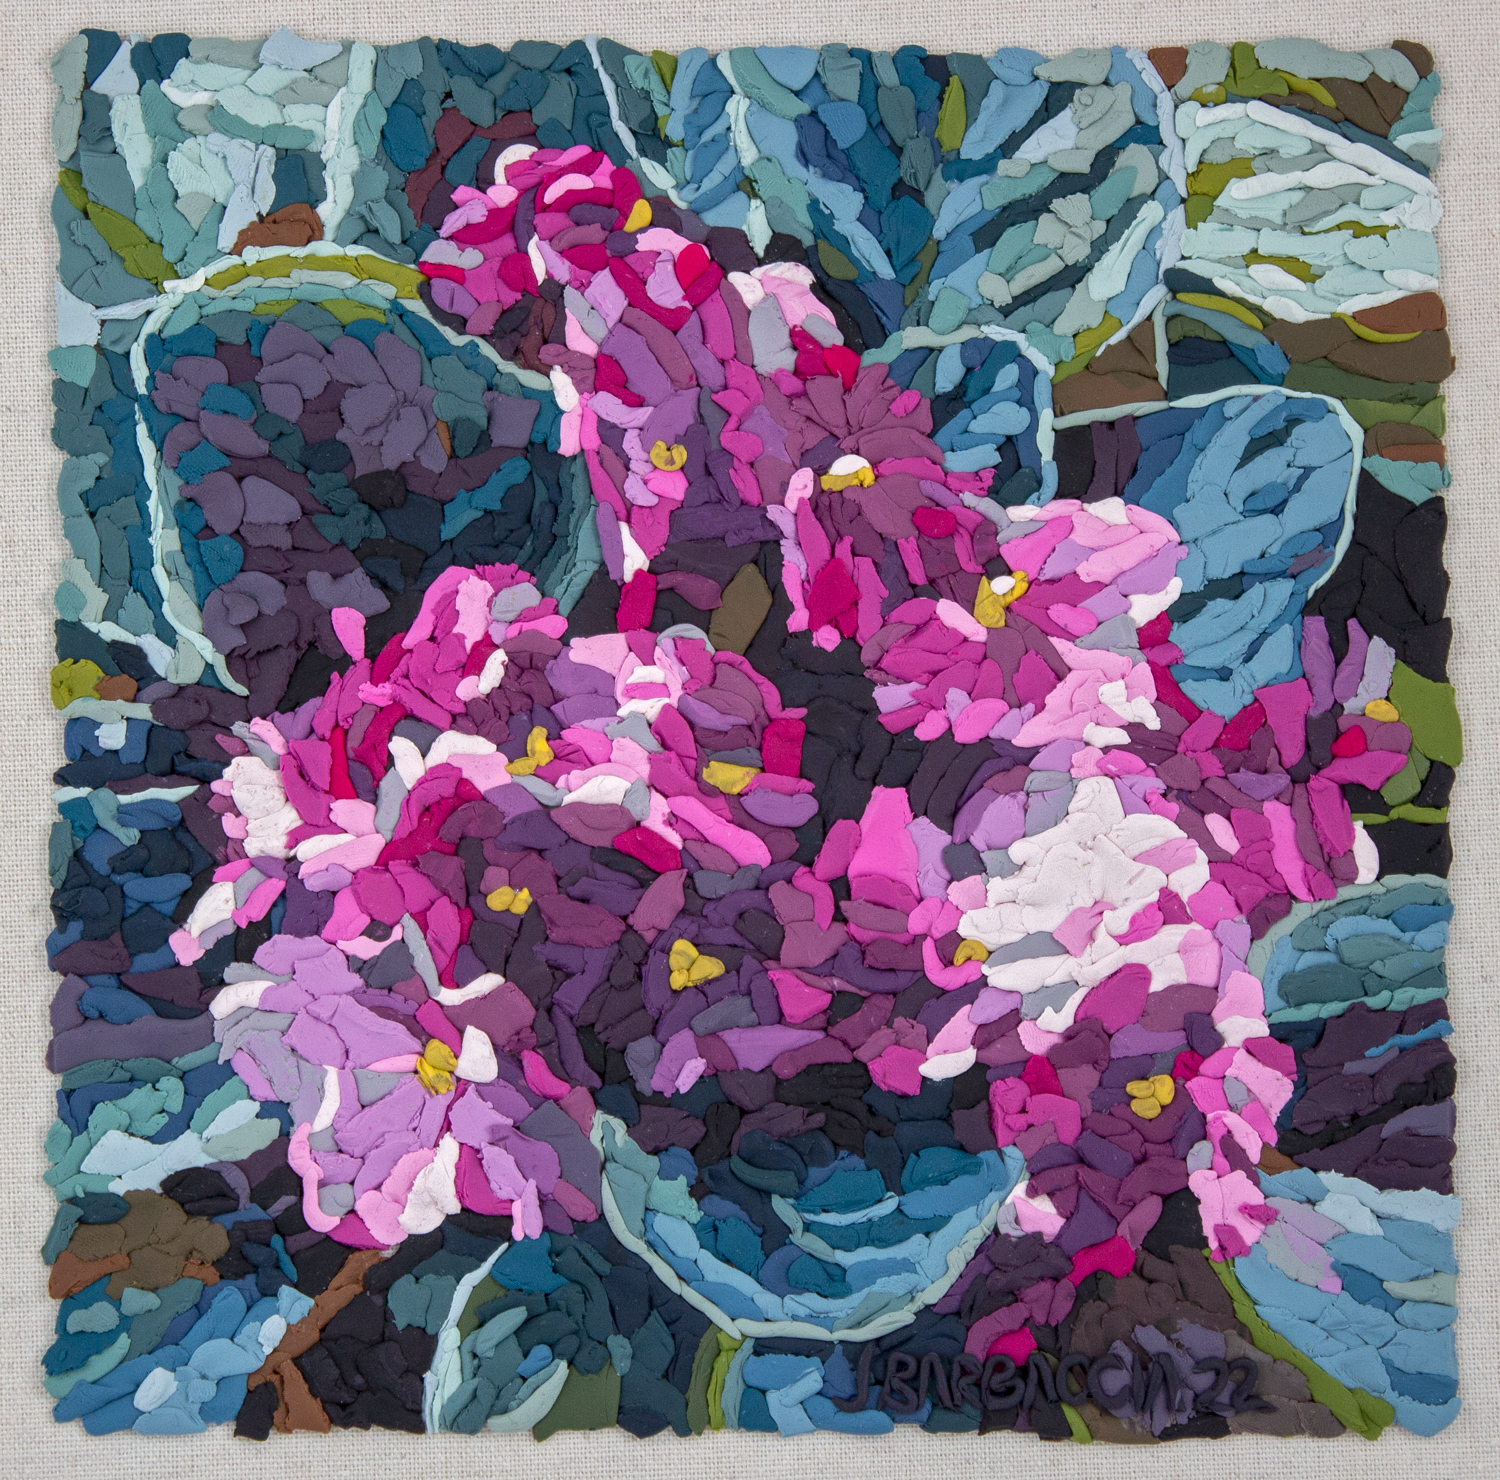 African Violets
Polymer clay on linen
8″ x 8″
$400